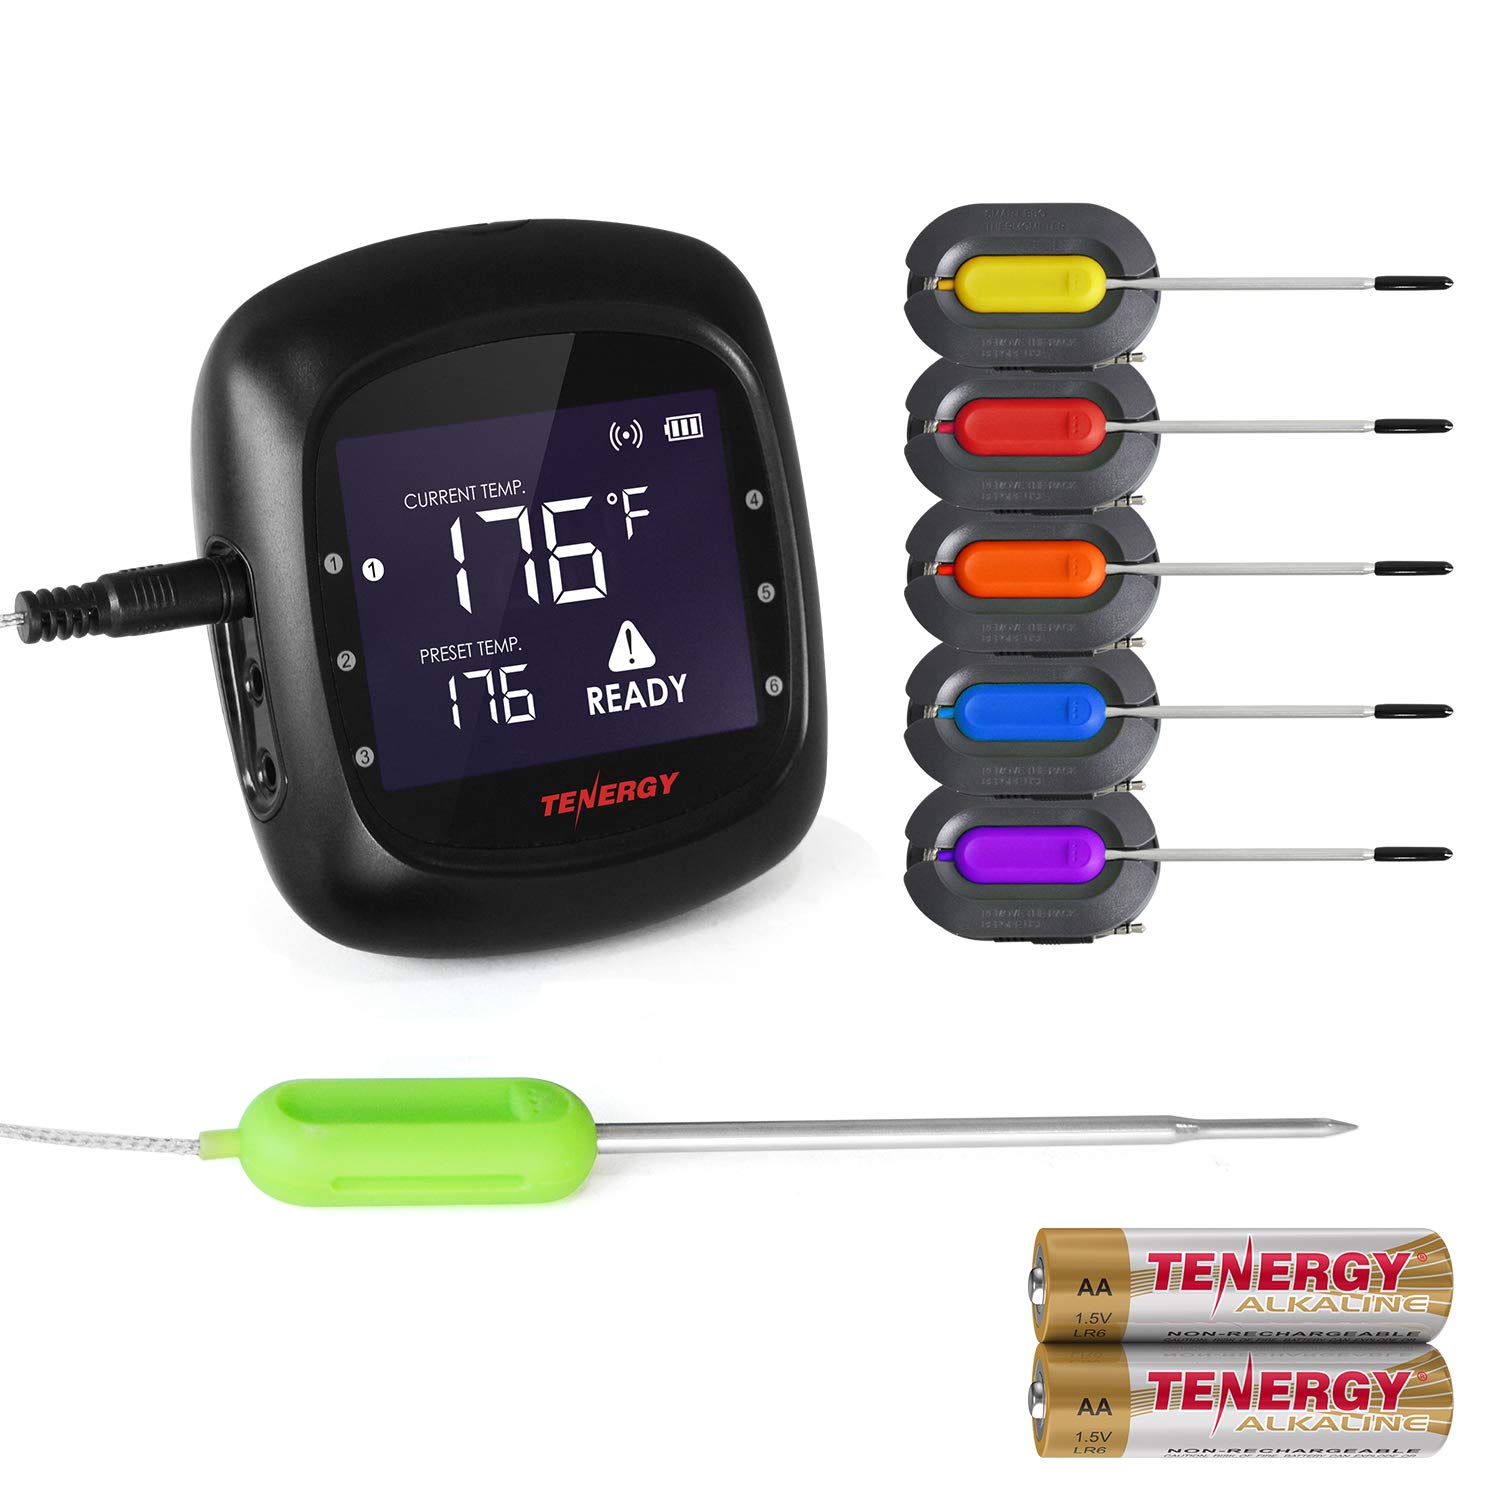 Tenergy Solis Digital Meat Thermometer, APP Controlled Wireless Bluetooth Smart BBQ Thermometer w/ 6 Stainless Steel Probes, Large LCD Display, & C...